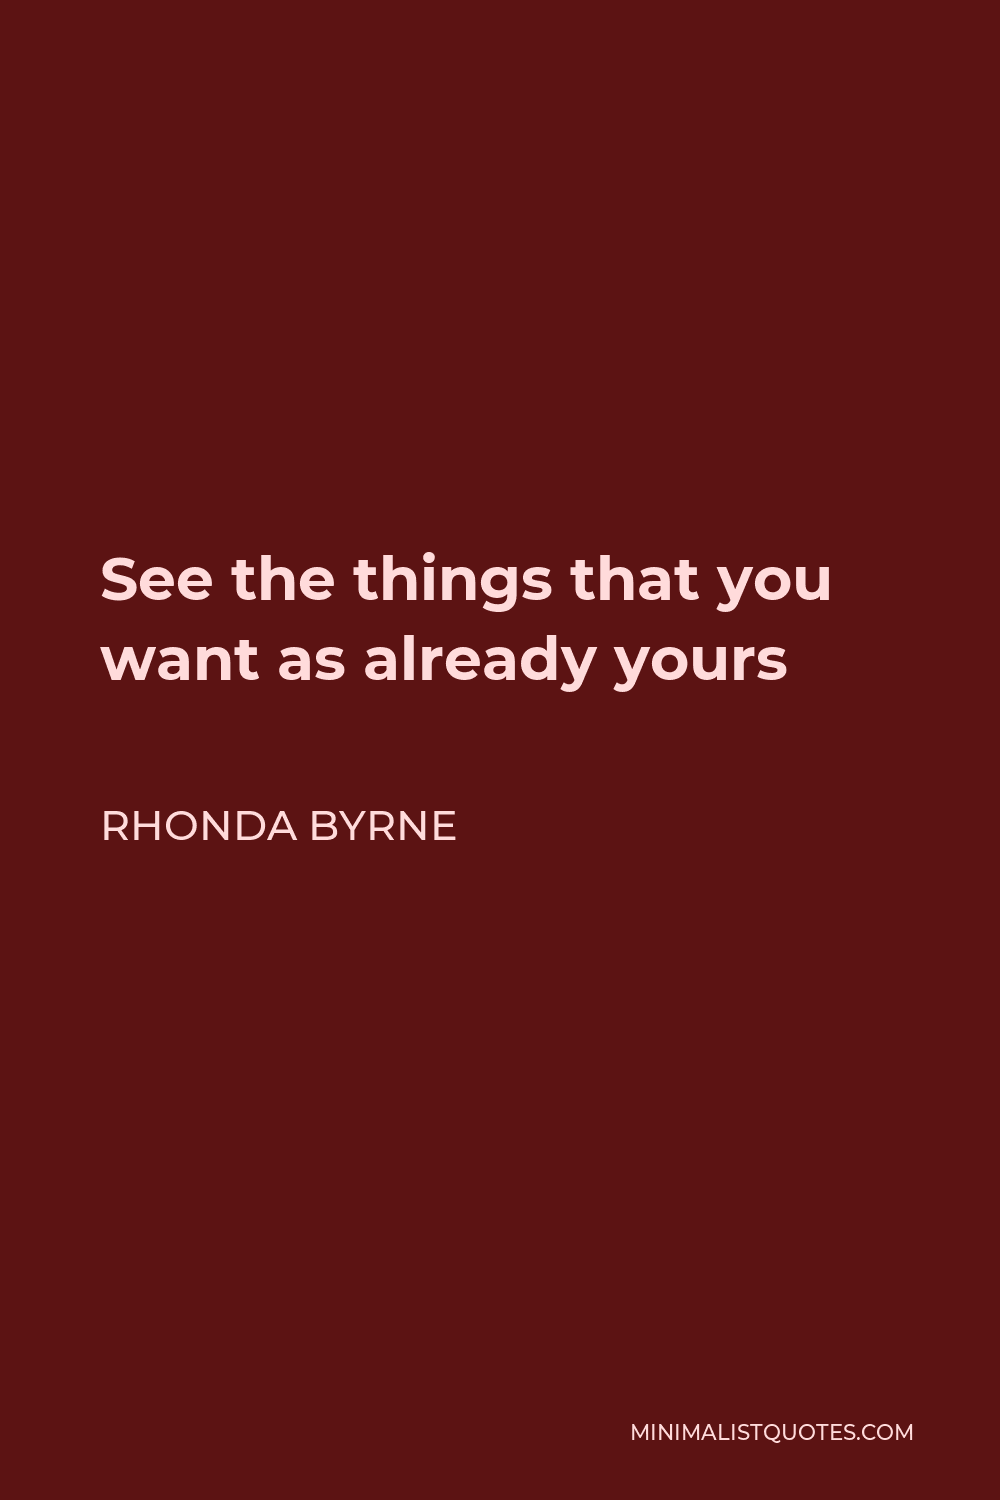 Rhonda Byrne Quote - See the things that you want as already yours